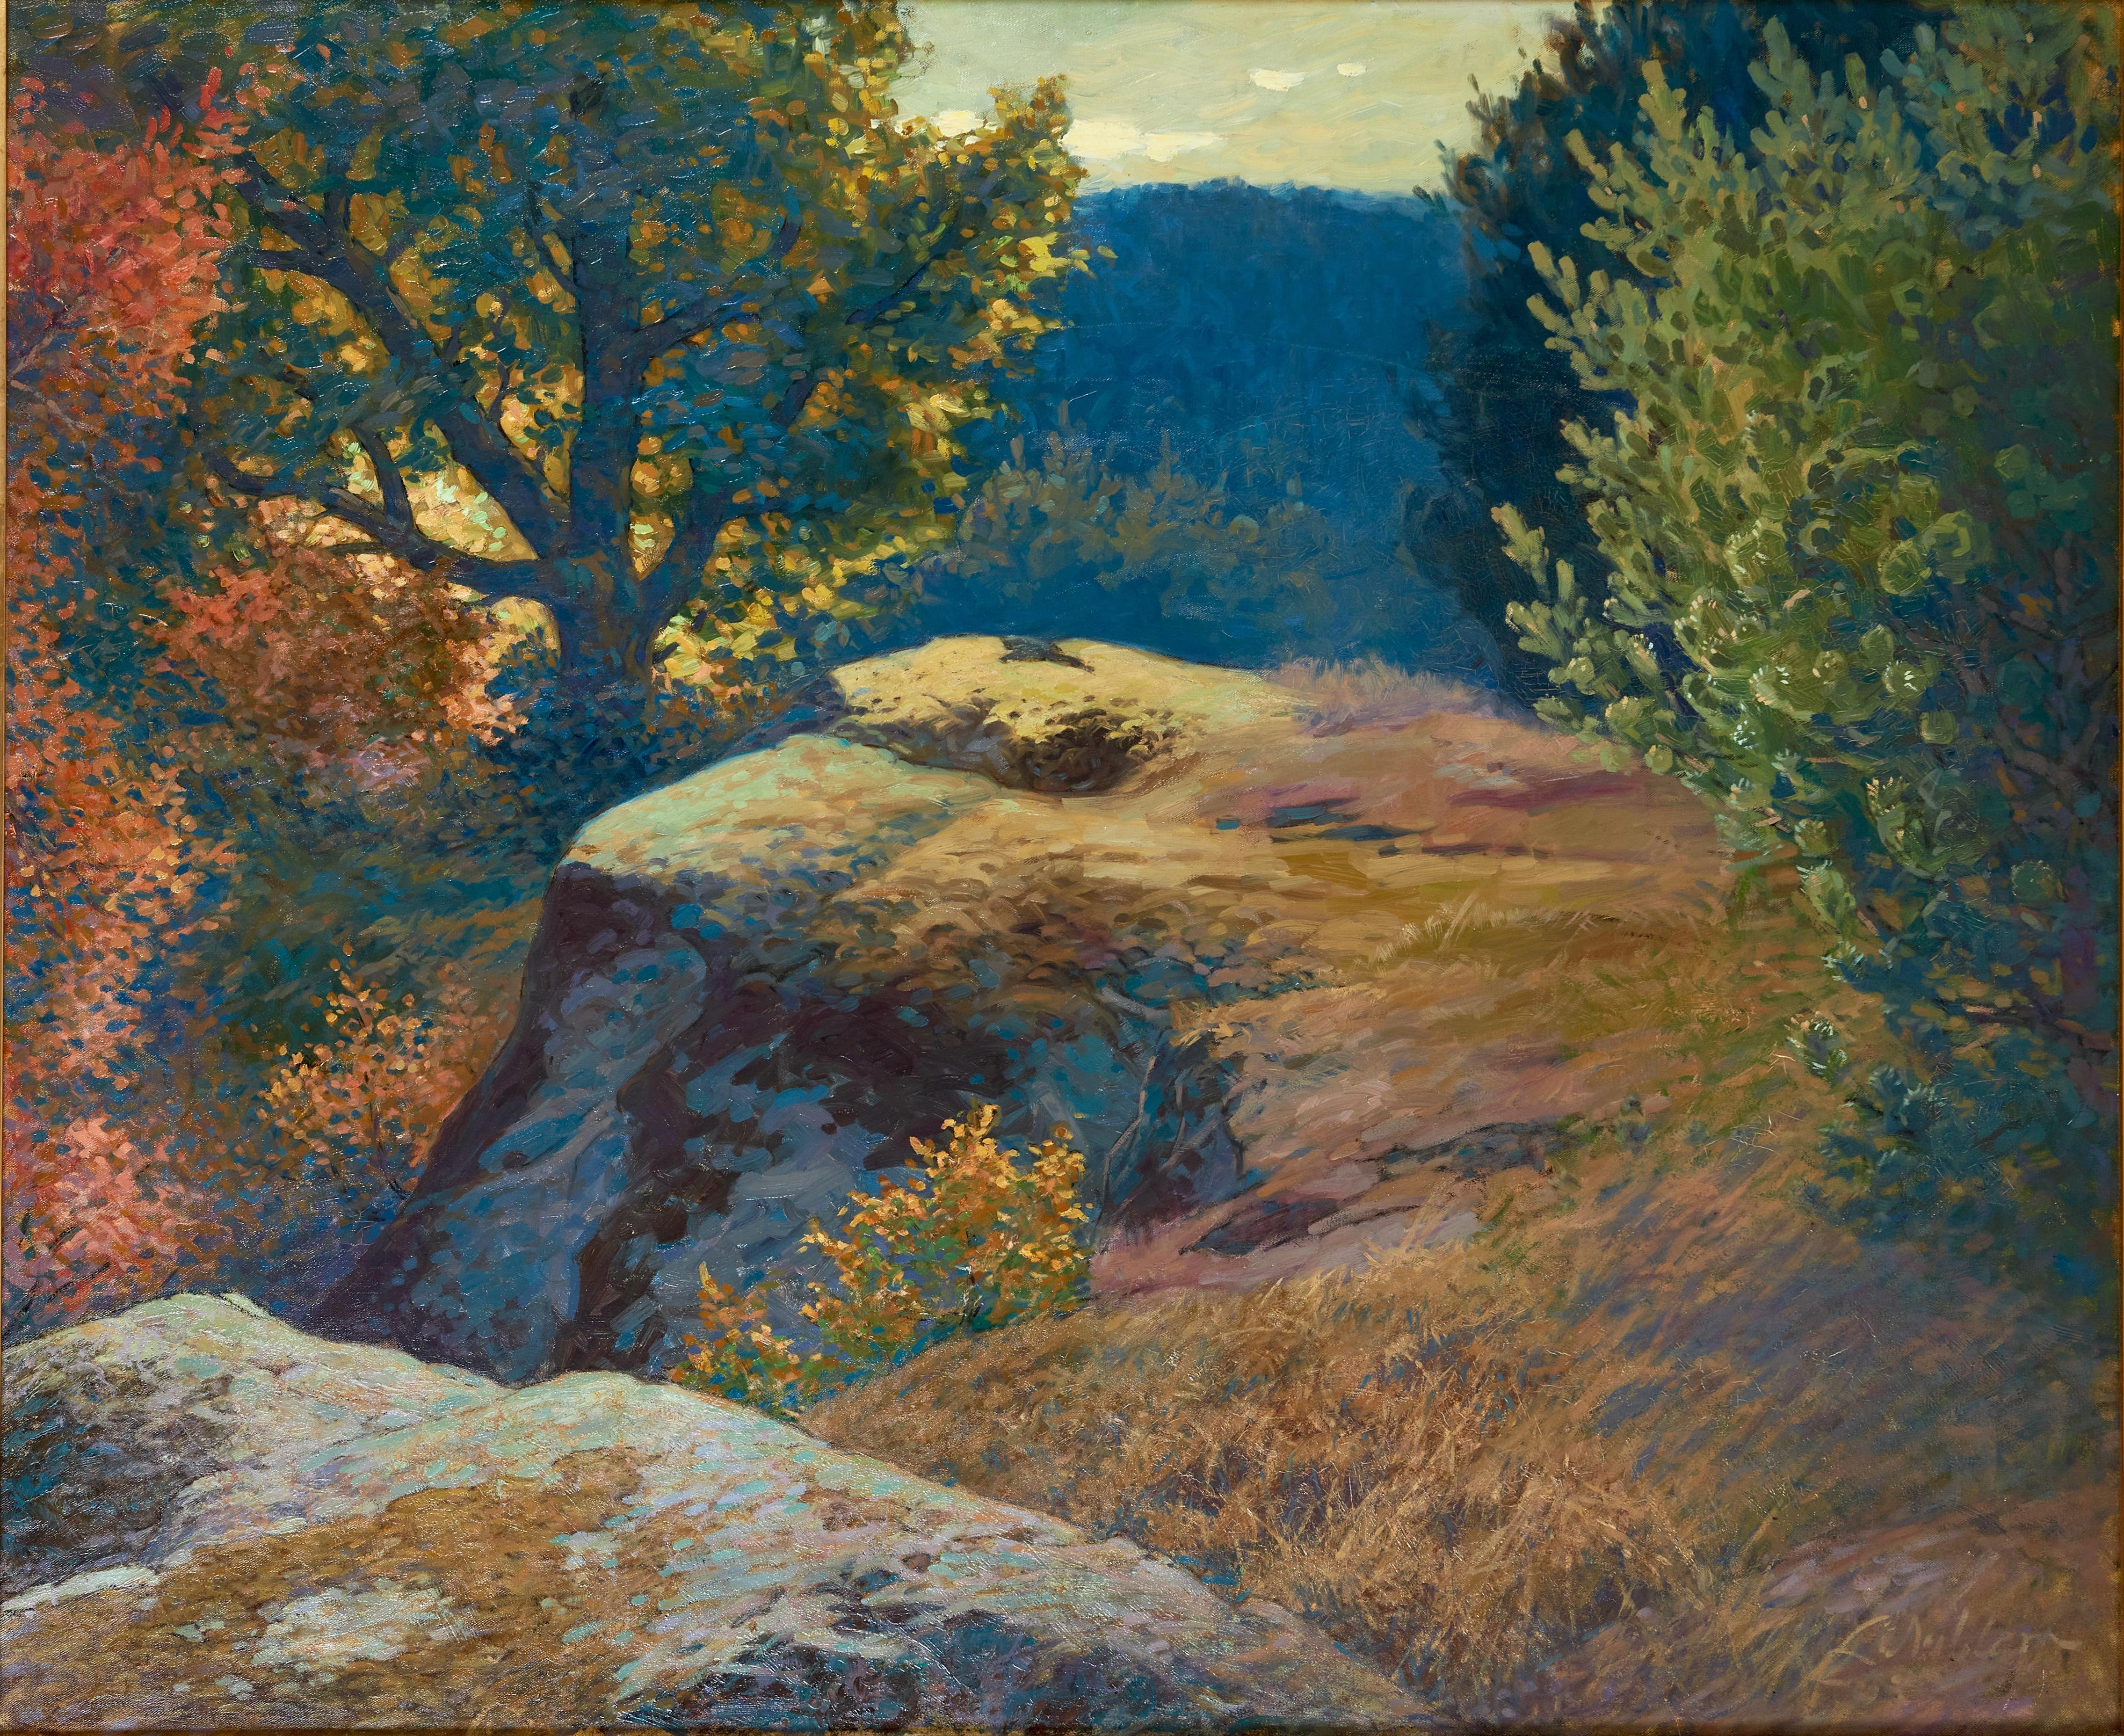 Lennart Nyblom, Fall Sunset Landscape with Trees and Bushes on a Rocky Hill  - Painting by Ture Lennart Nyblom